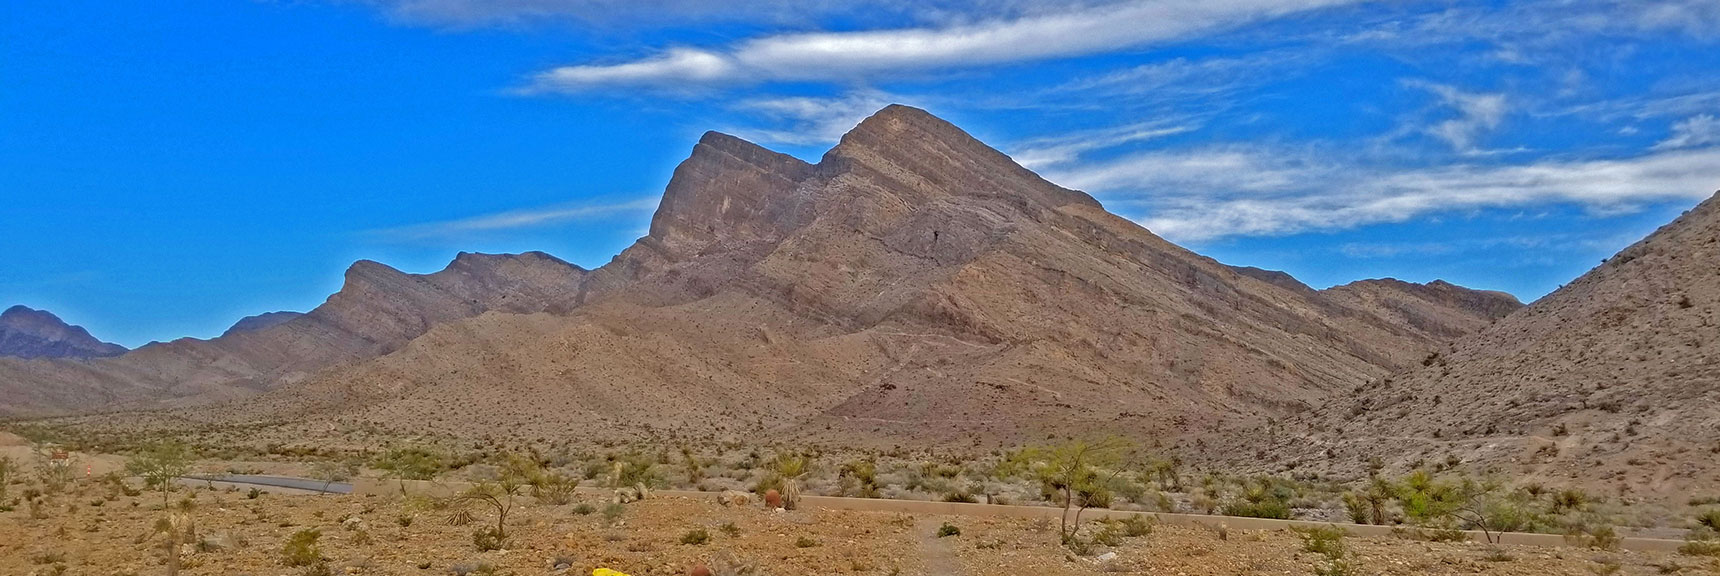 High Points on Border Ridge, North (Right) Side of Canyon | Little Red Rock Las Vegas, Nevada, Near La Madre Mountains Wilderness